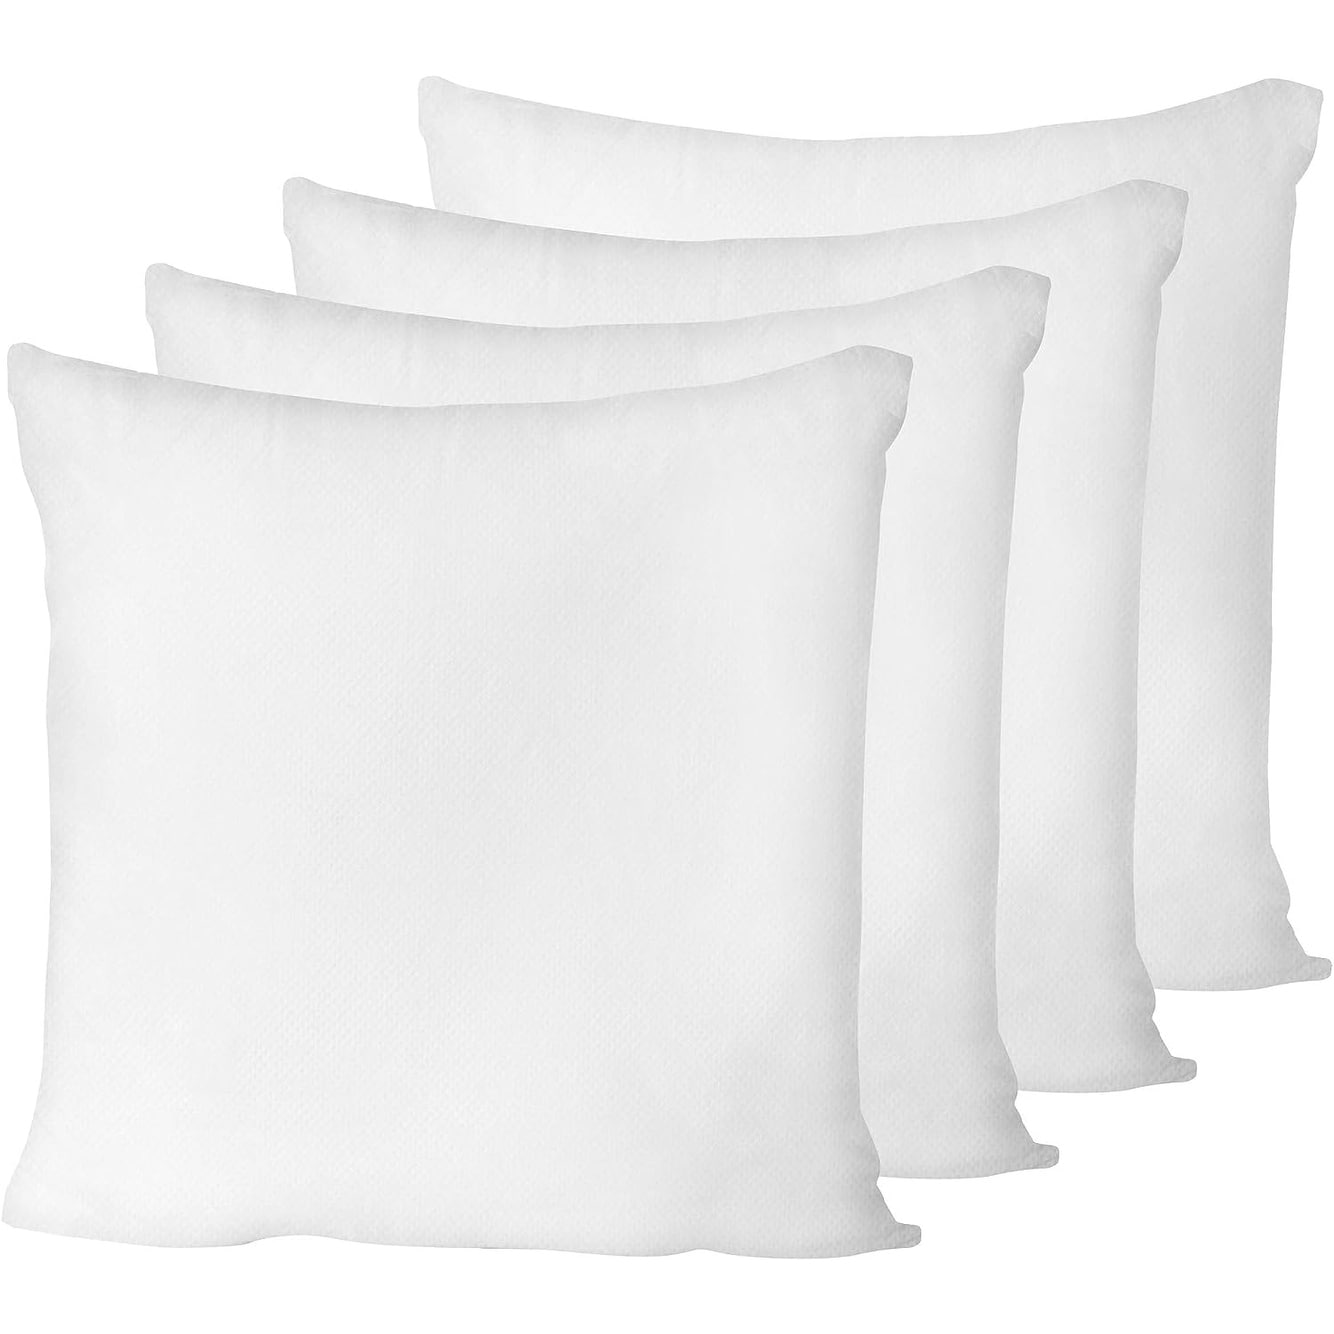 https://ak1.ostkcdn.com/images/products/is/images/direct/a11c96e73e0a4c8dd1656416d1cab8ff7ead8843/Polyester-Replacement-Cushion-Insert-in-Assorted-Sizes%2C-2-or-4-Pack.jpg